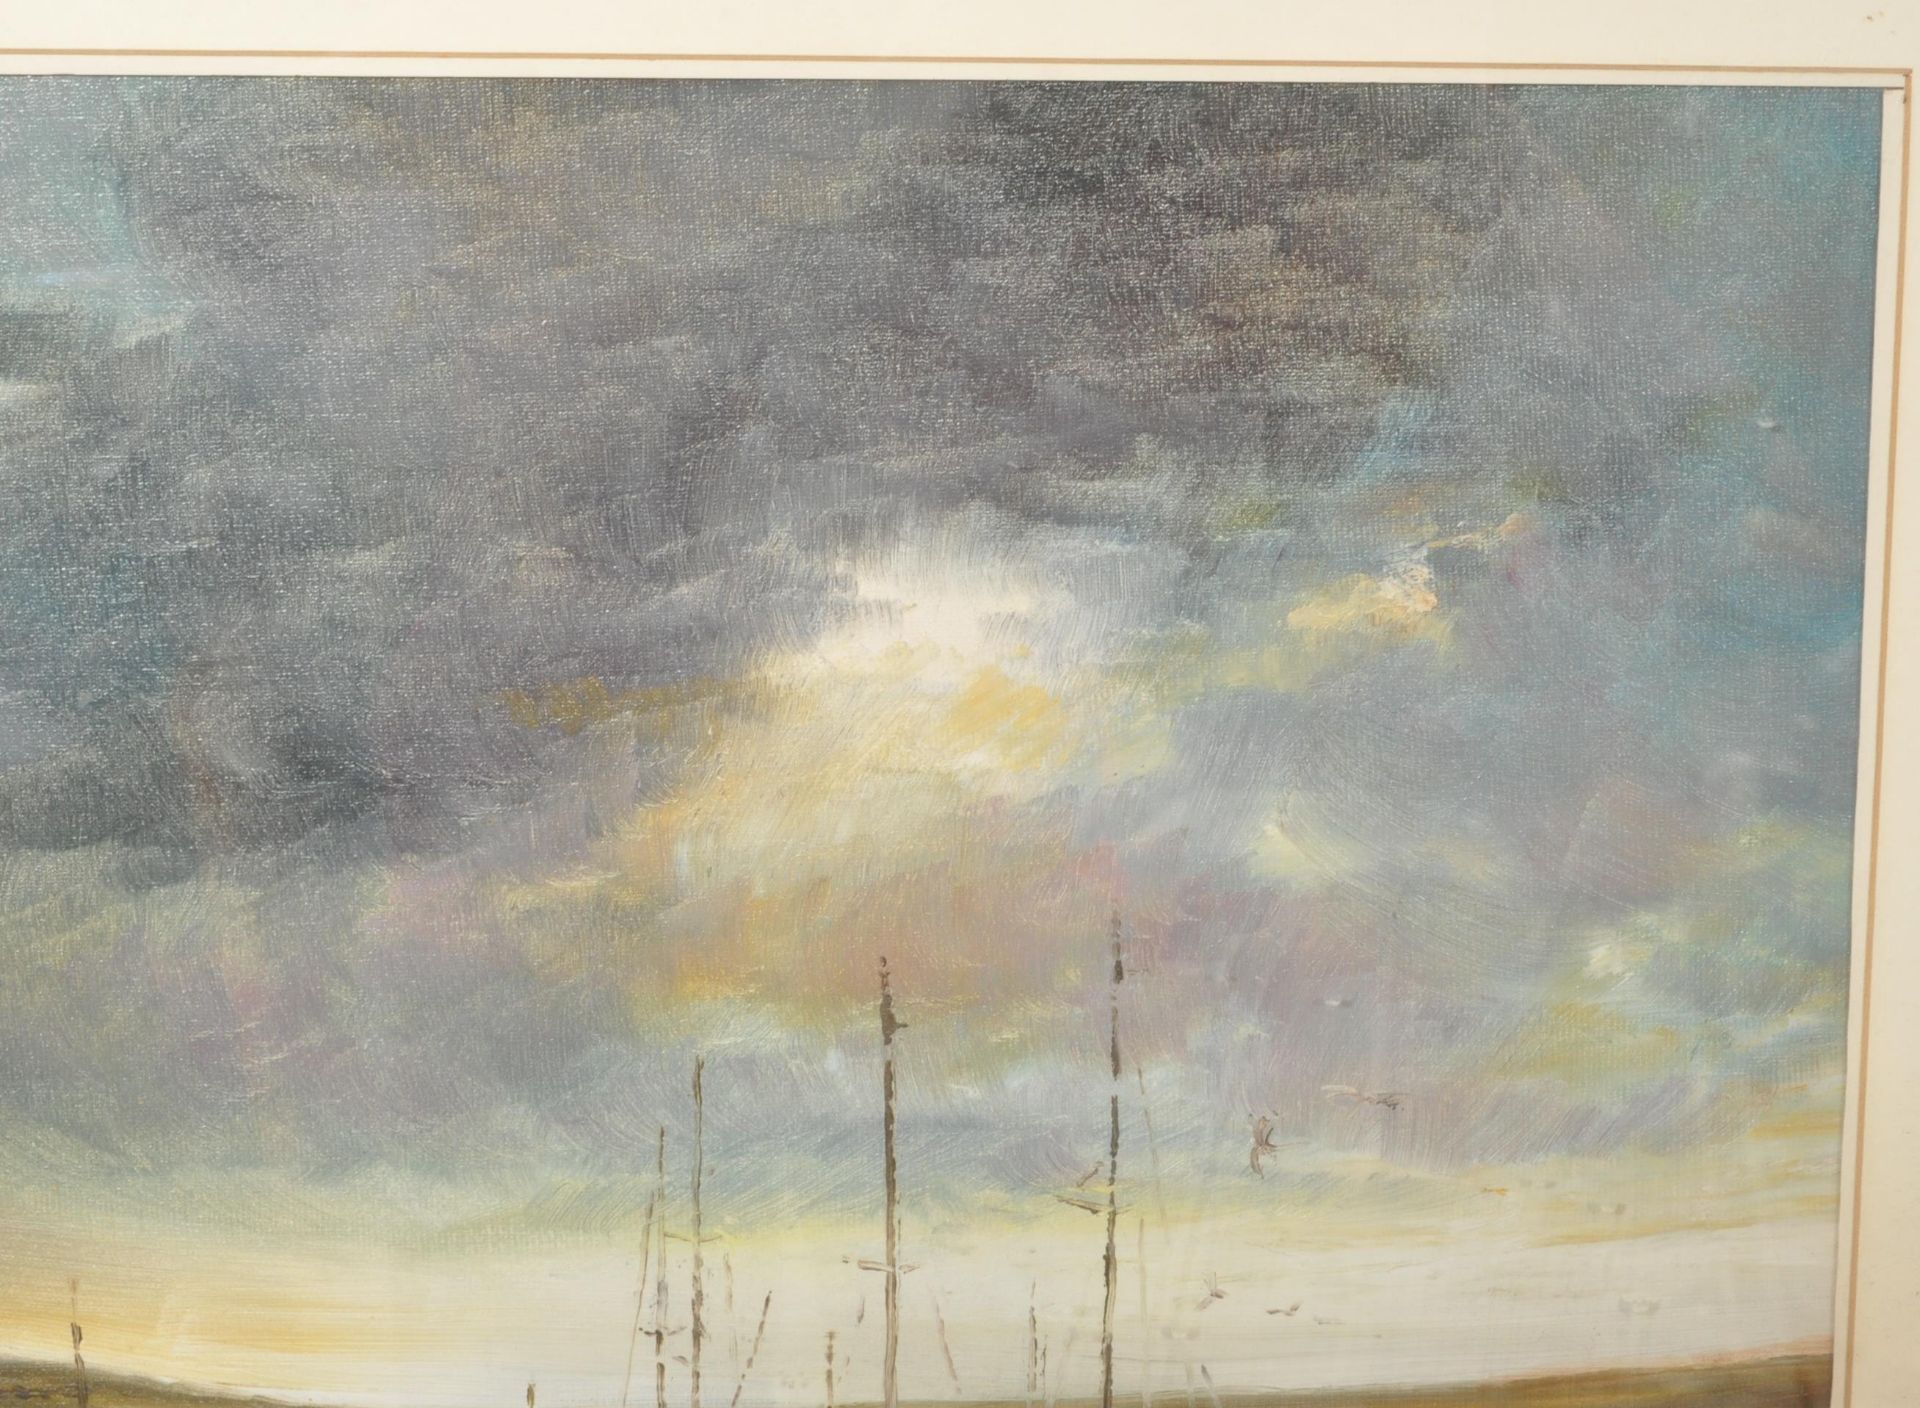 GLYN HEARD - STORM CLOUDS UPHILL - VINTAGE 20TH CENTURY OIL ON CANVAS PAINTING - Image 5 of 6